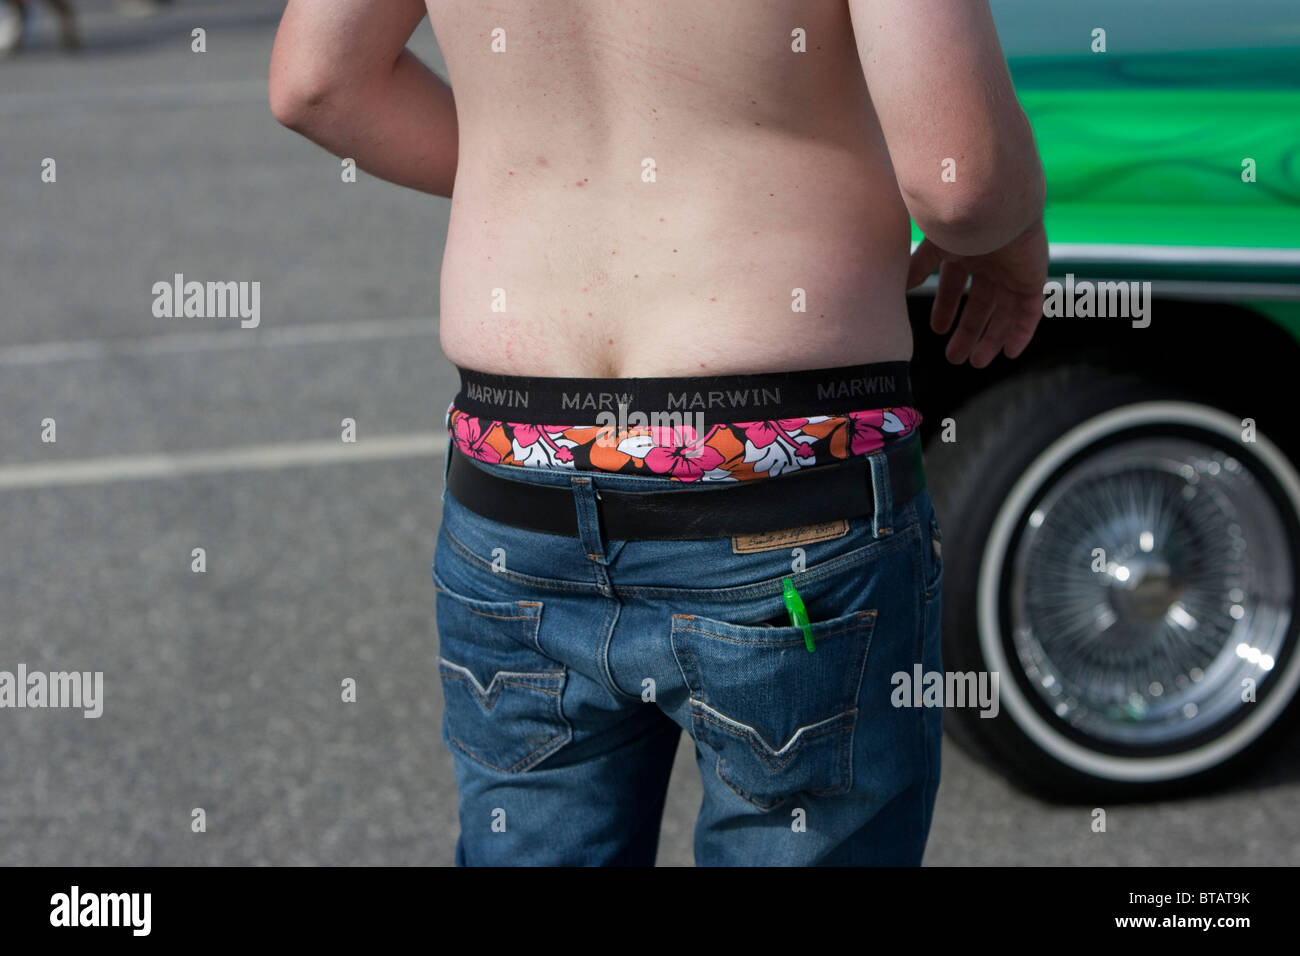 Man with low pants with visible underwear Stock Photo - Alamy